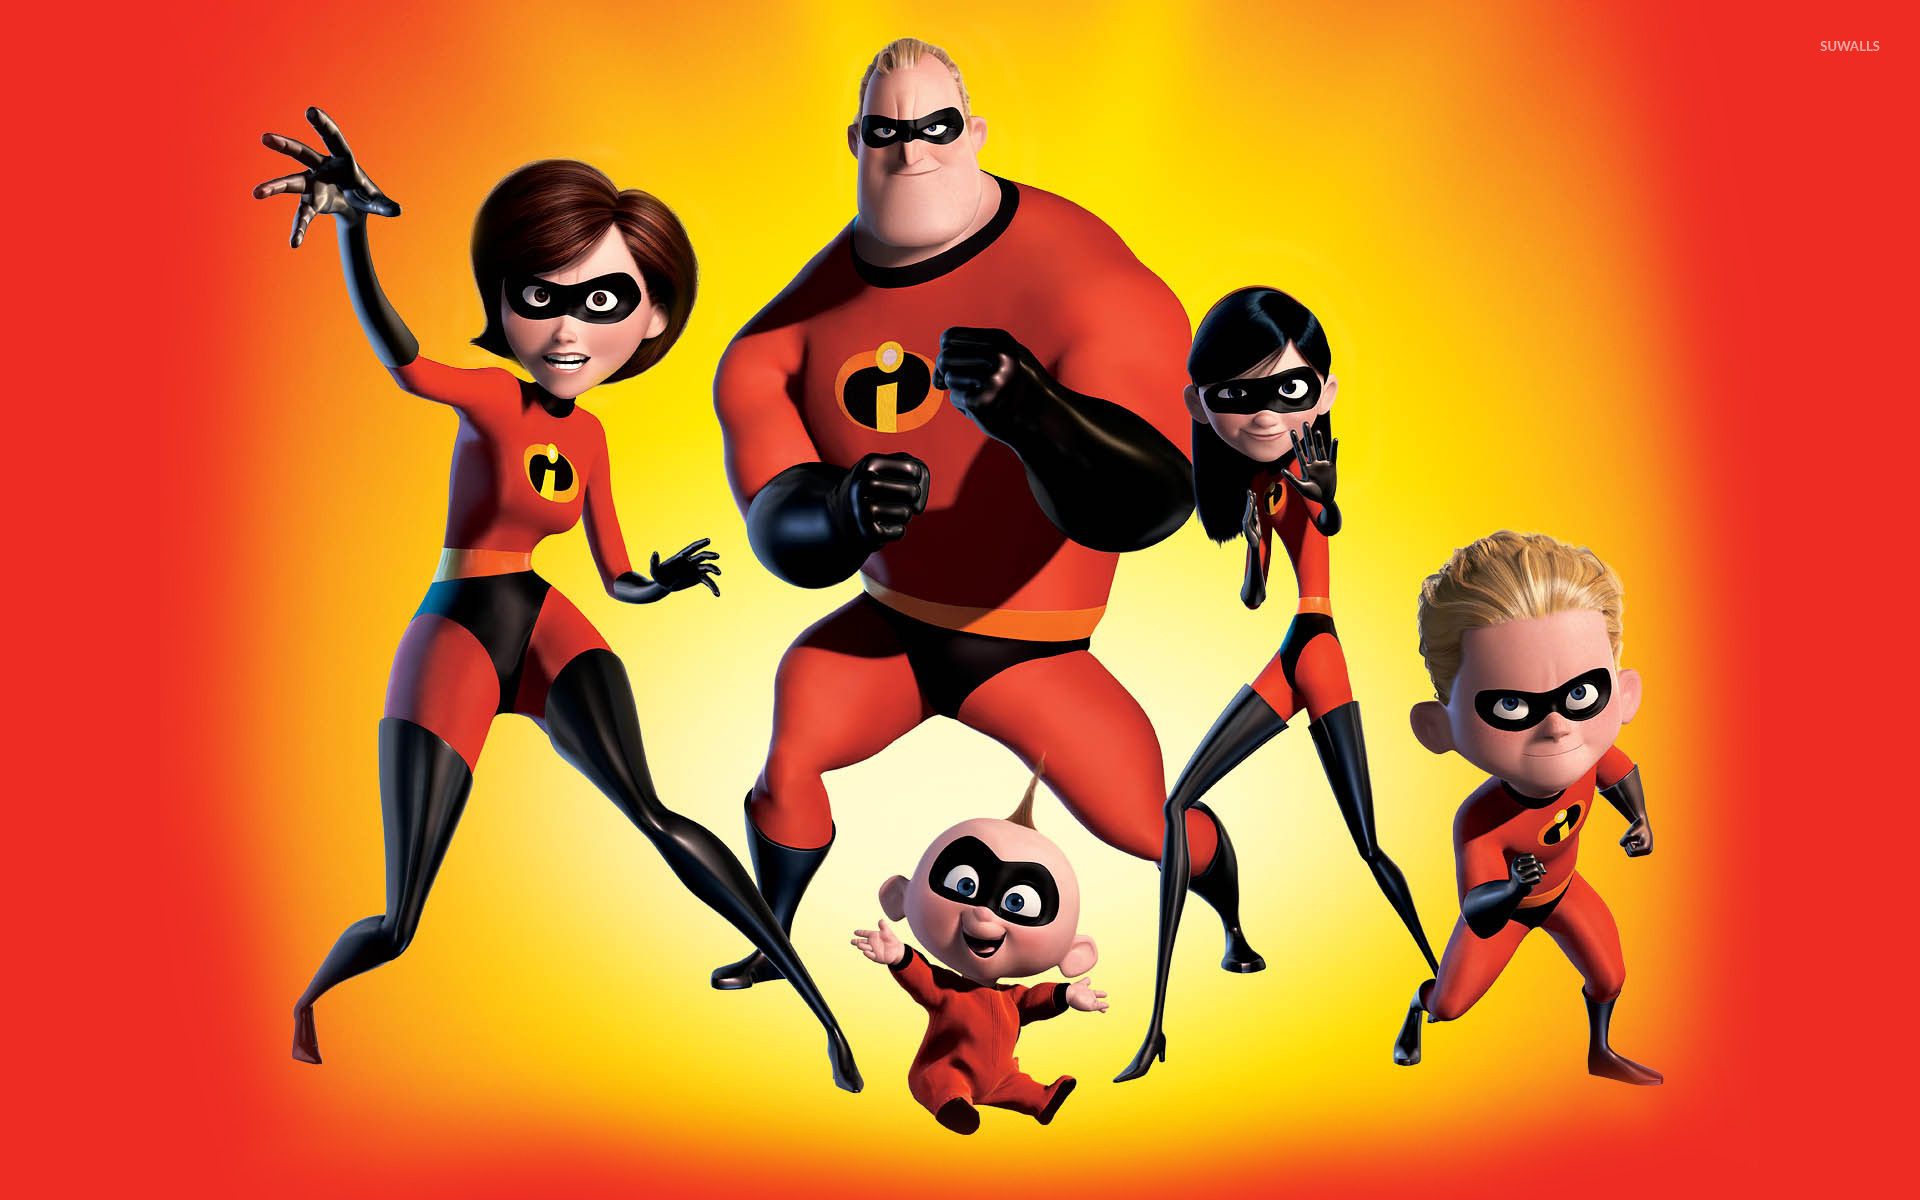 Dash From The Incredibles 2 Wallpapers